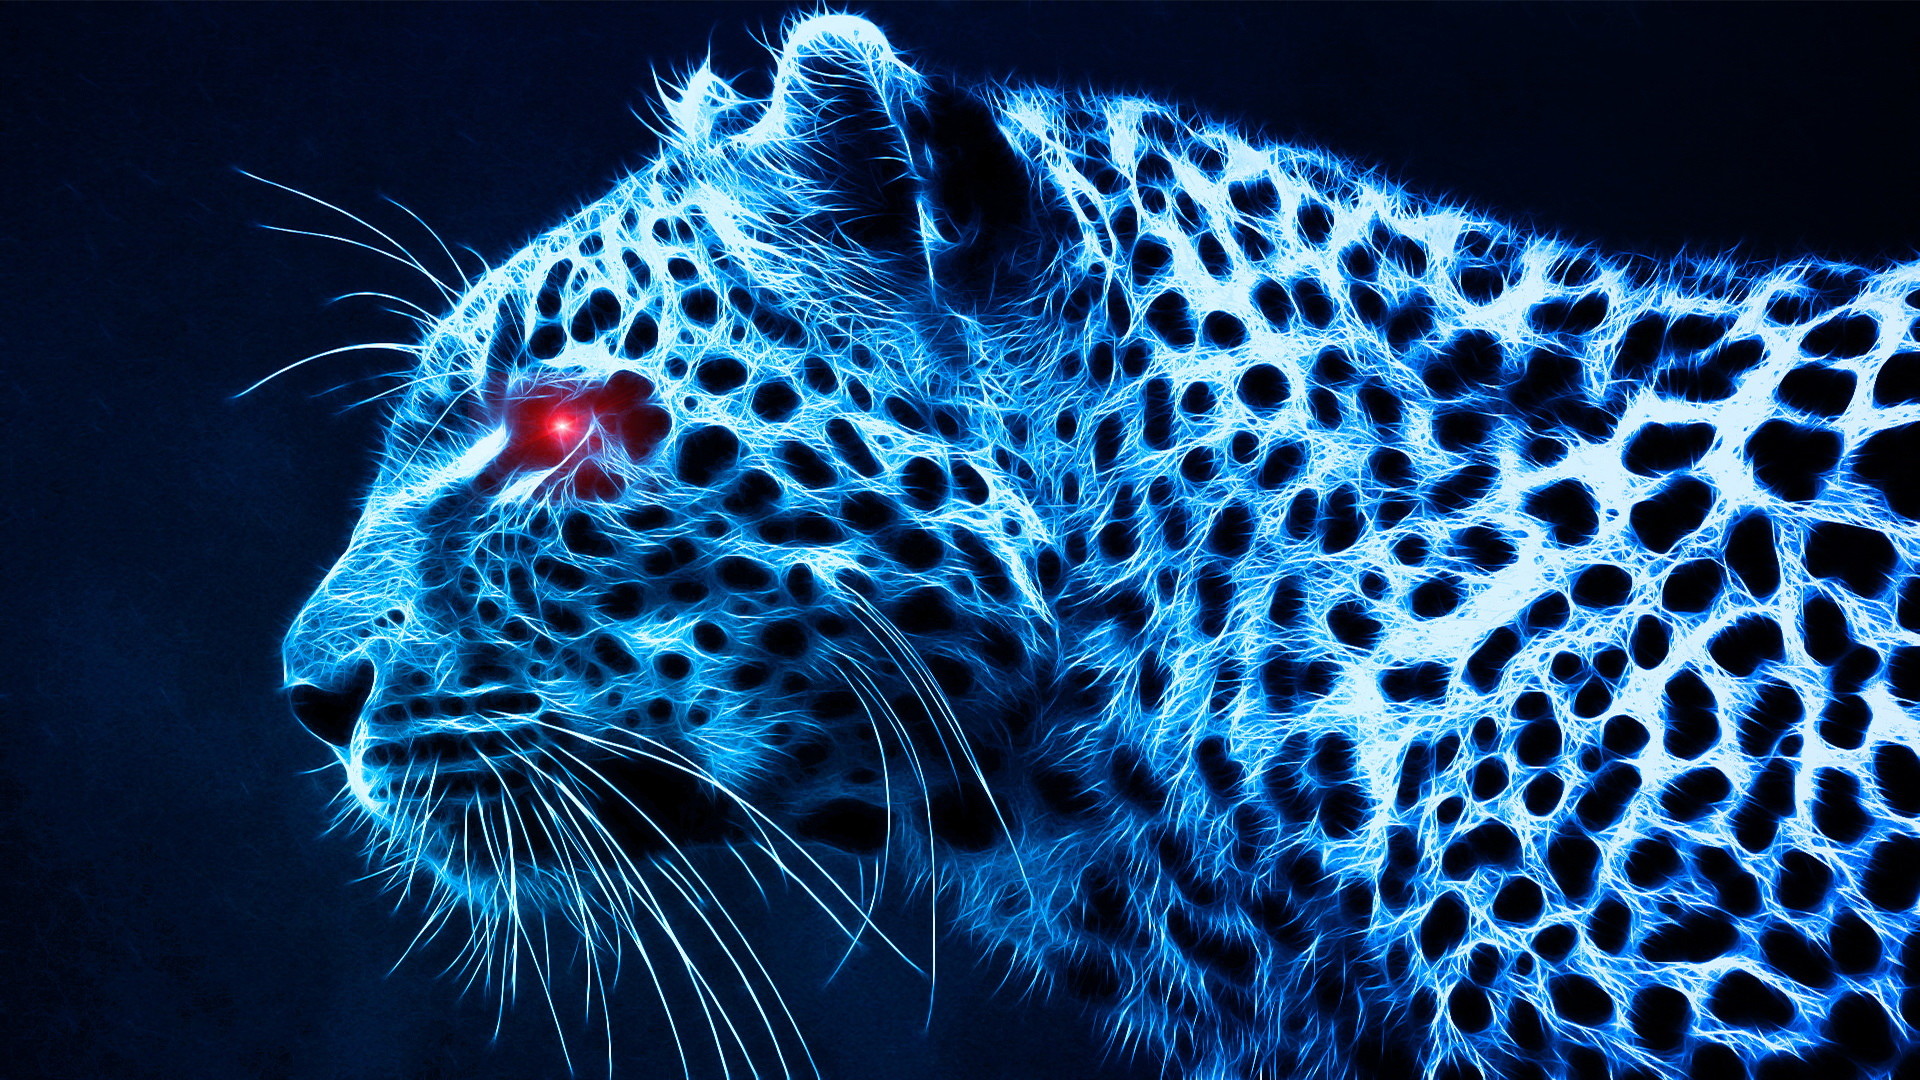 1920x1080 photos download leopard wallpapers hd desktop wallpapers high definition  monitor download free amazing background photos artwork 1920Ã1080 Wallpaper  HD